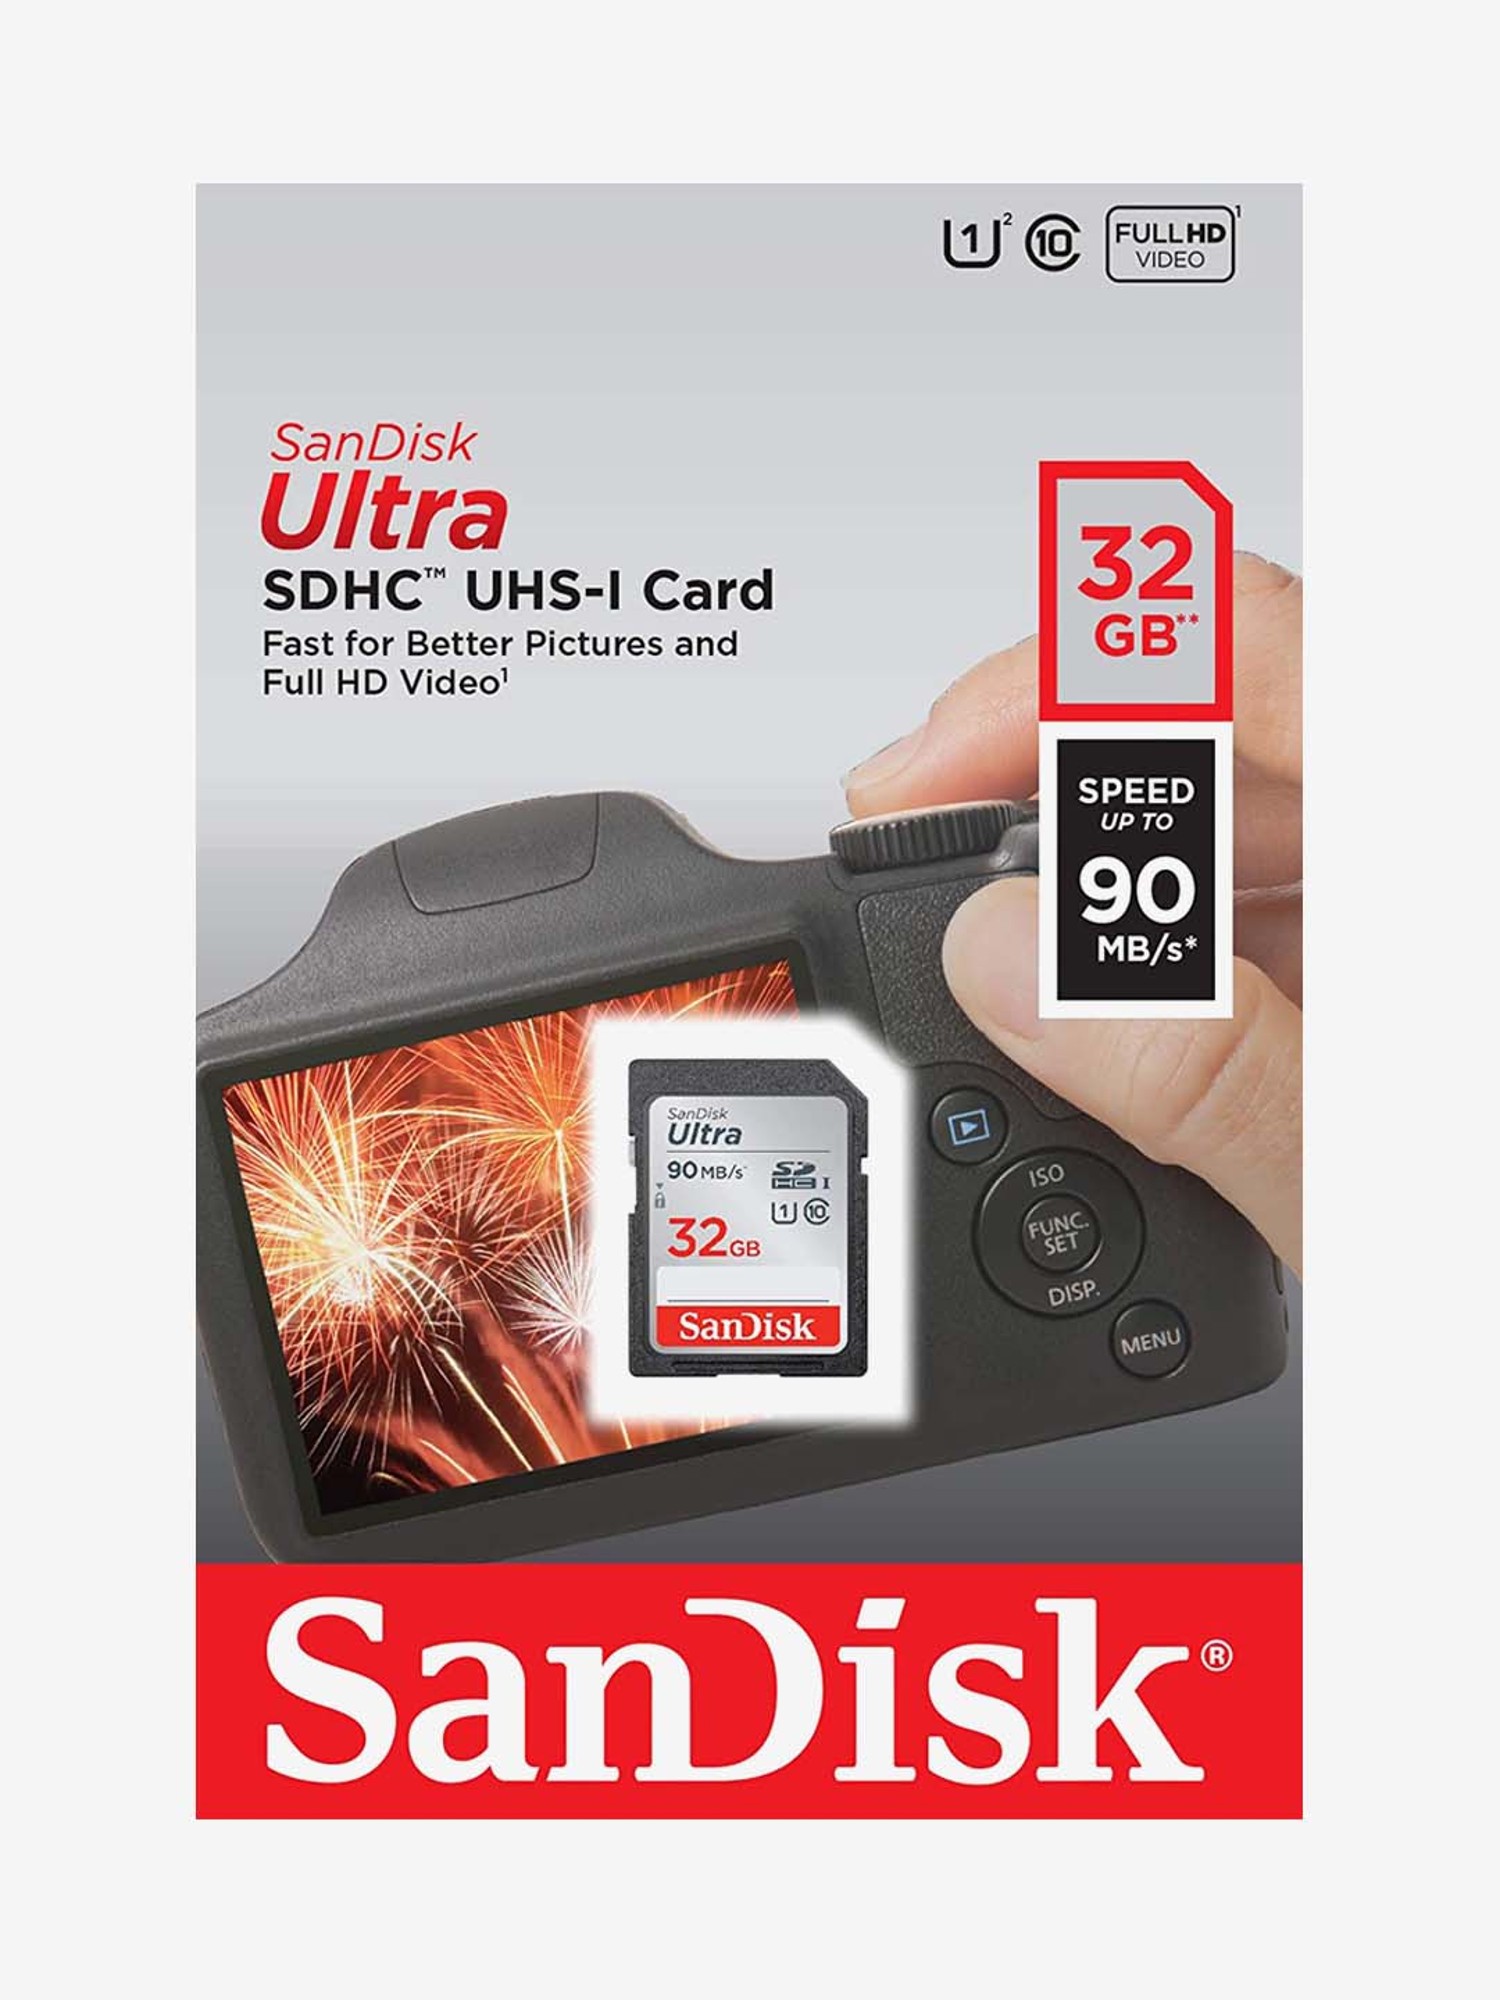 Grey/Black SDSDUNC-032G-GN6IN SanDisk 32GB Ultra Class 10 SDHC UHS-I Memory Card Up to 80MB Renewed 